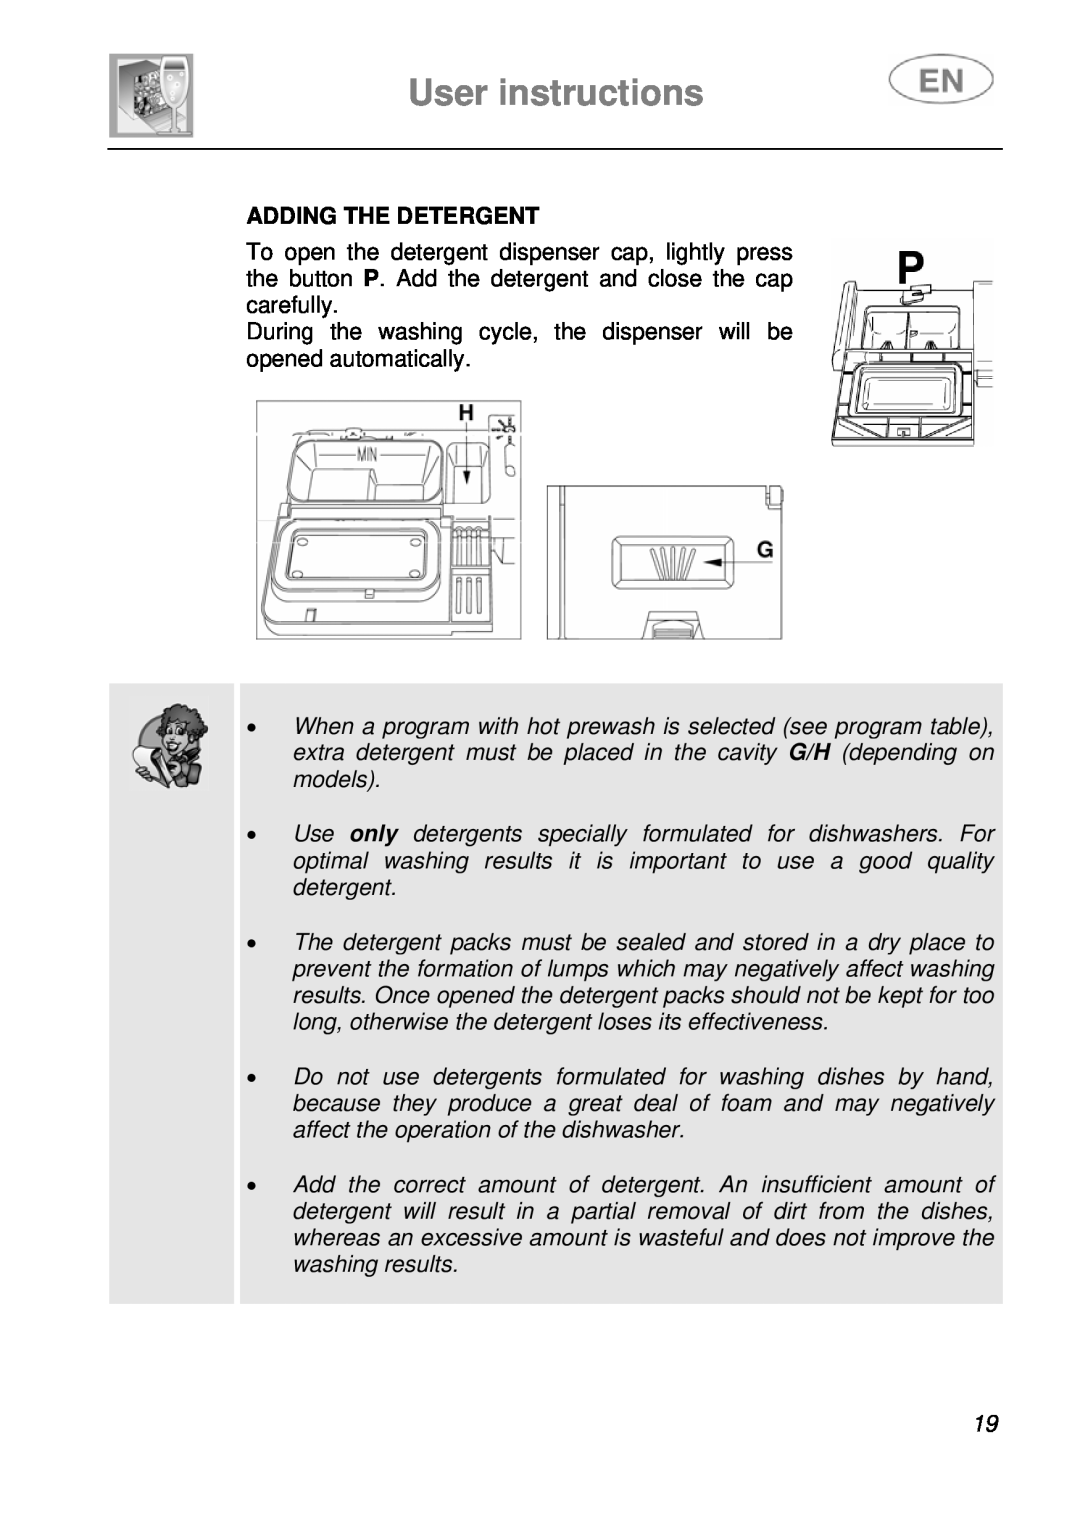 Smeg PL115NE User instructions, Adding The Detergent, During the washing cycle, the dispenser will be opened automatically 